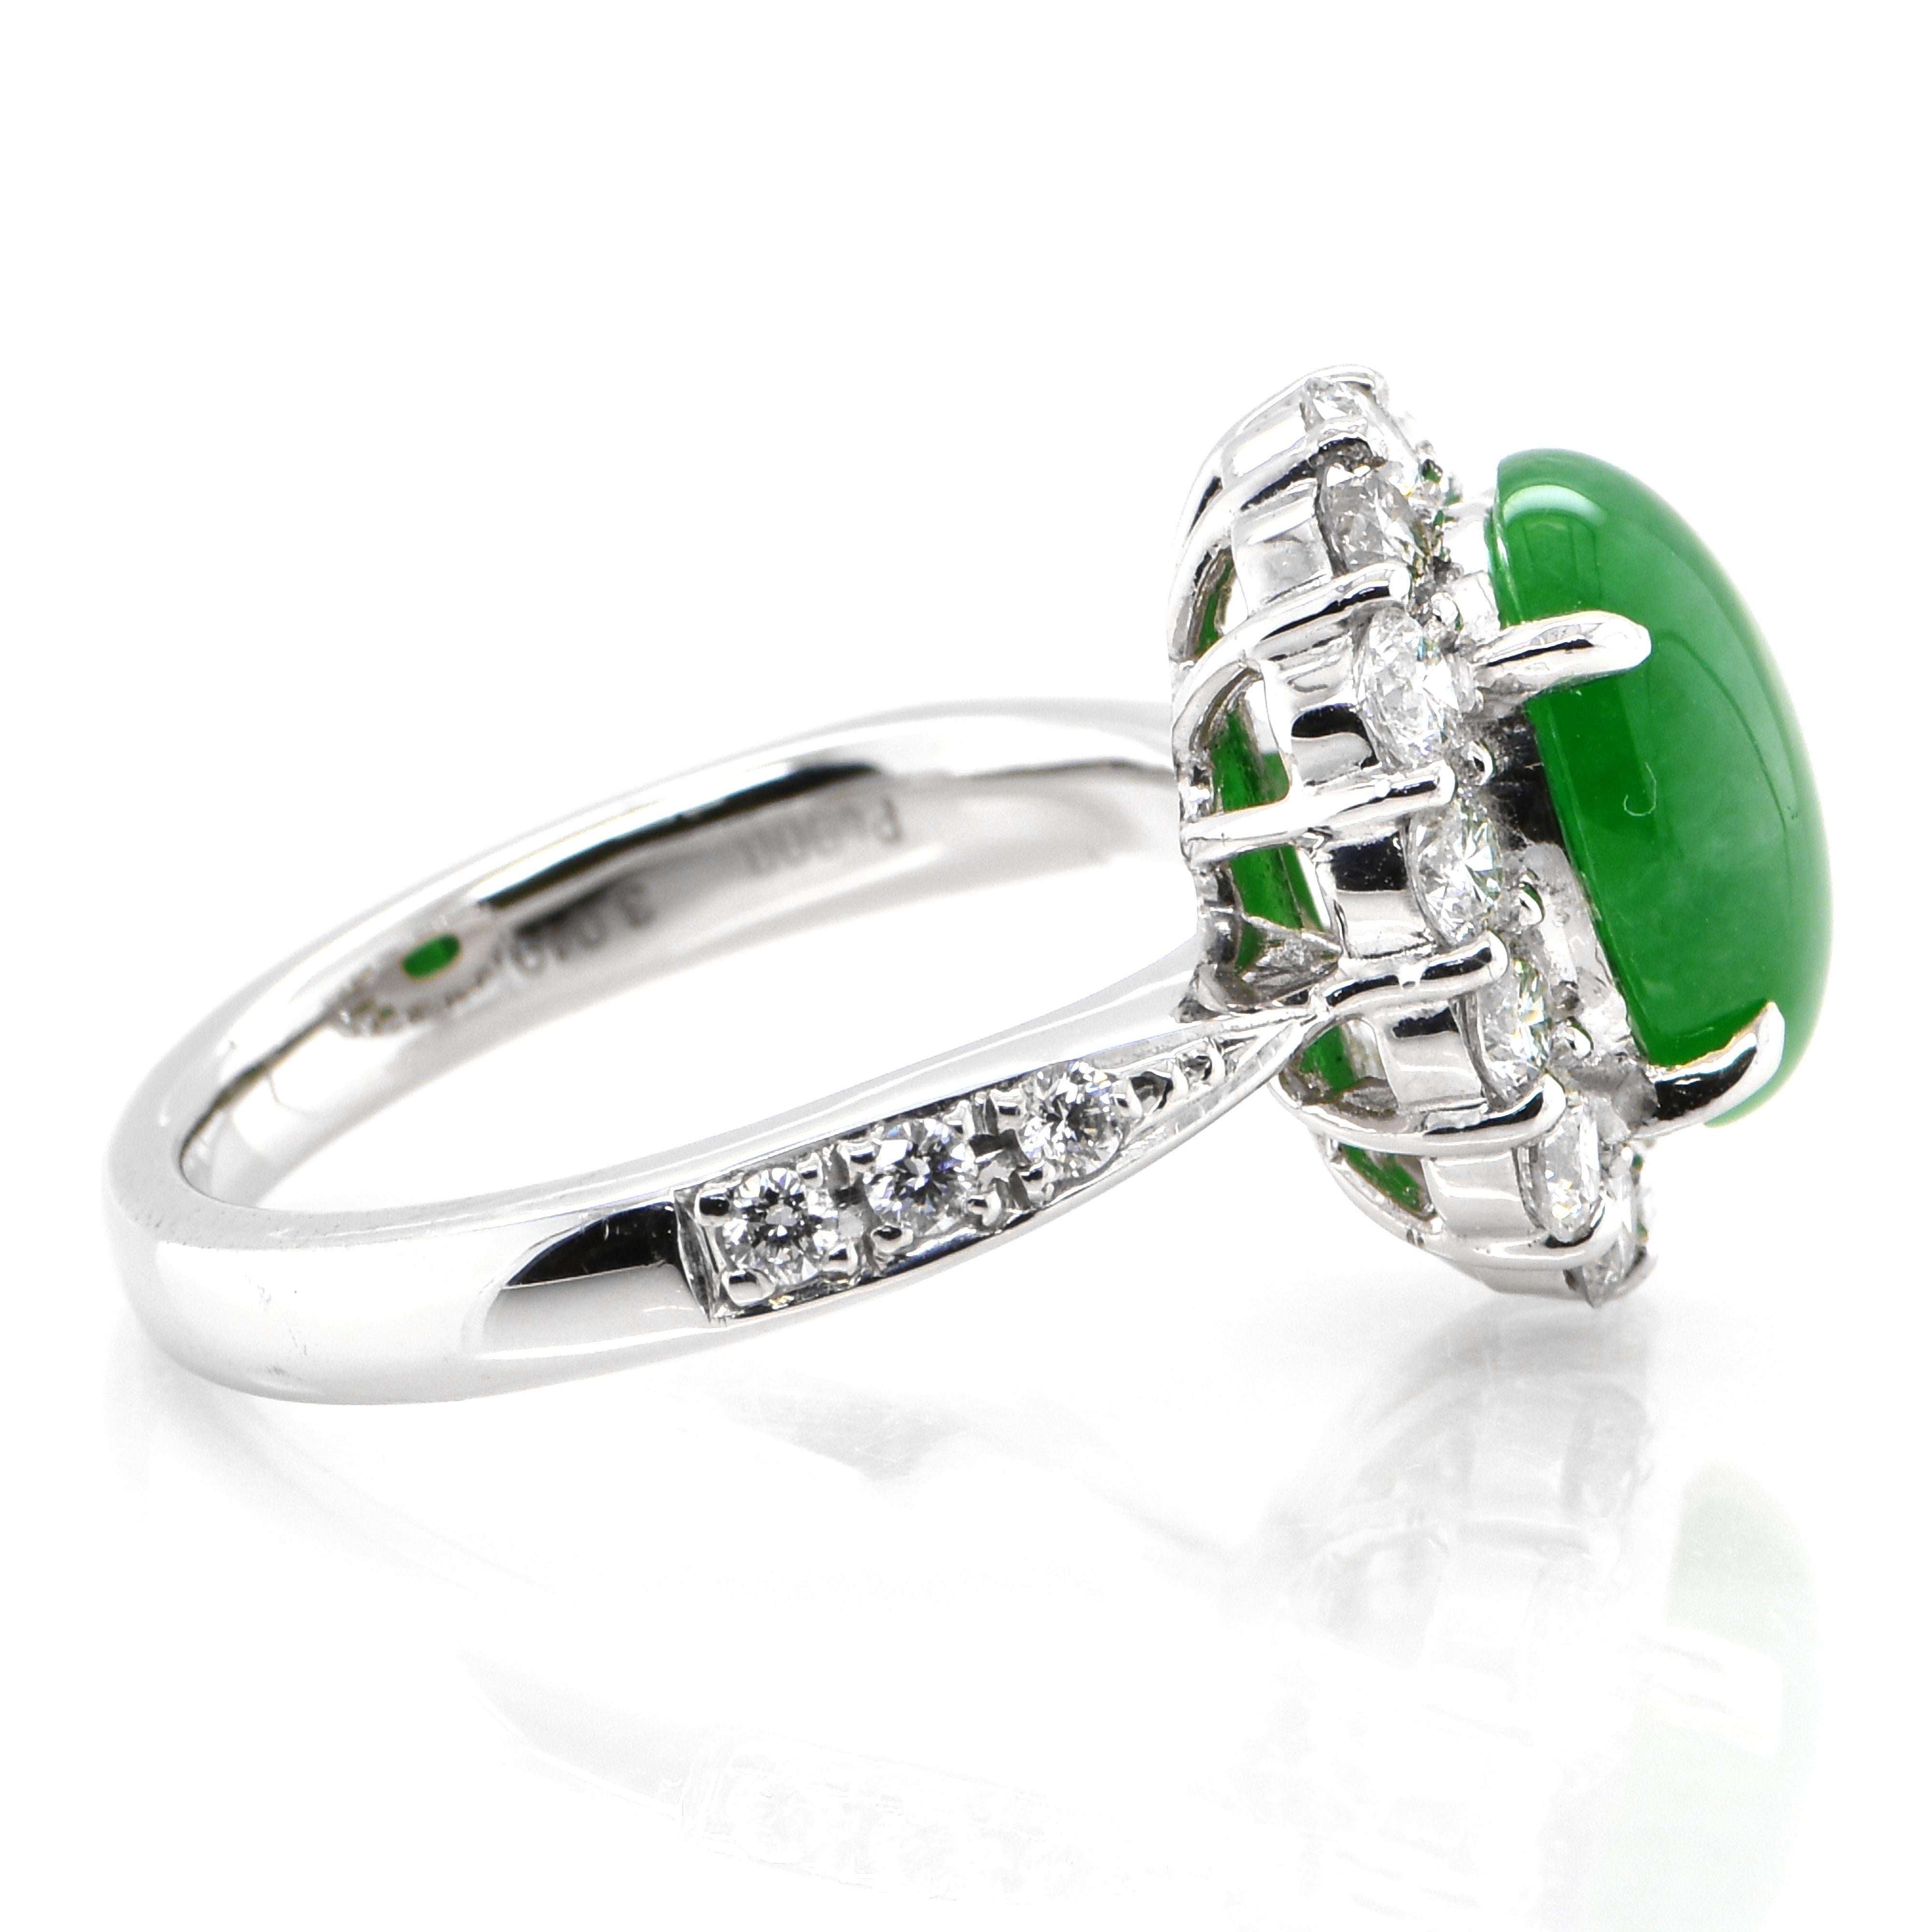 Cabochon 3.04 Carat Natural 'Non-Dyed' Jadeite and Diamond Ring Set in Platinum For Sale